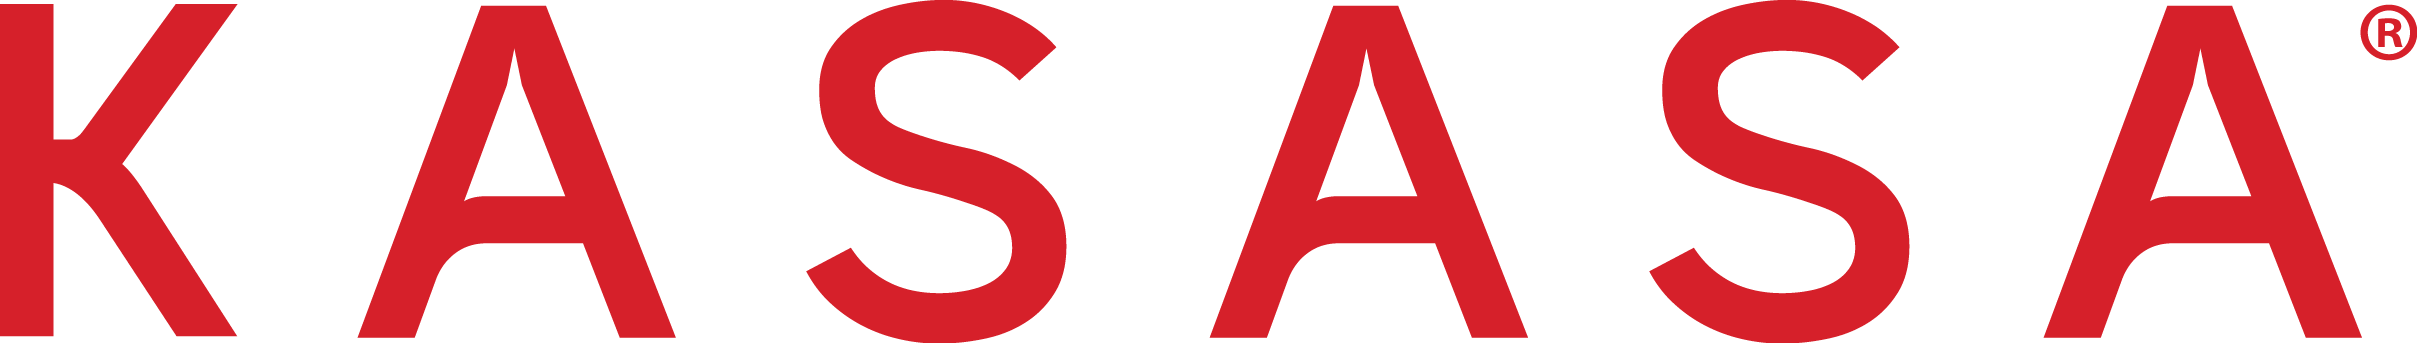 Picture of Kasasa logo